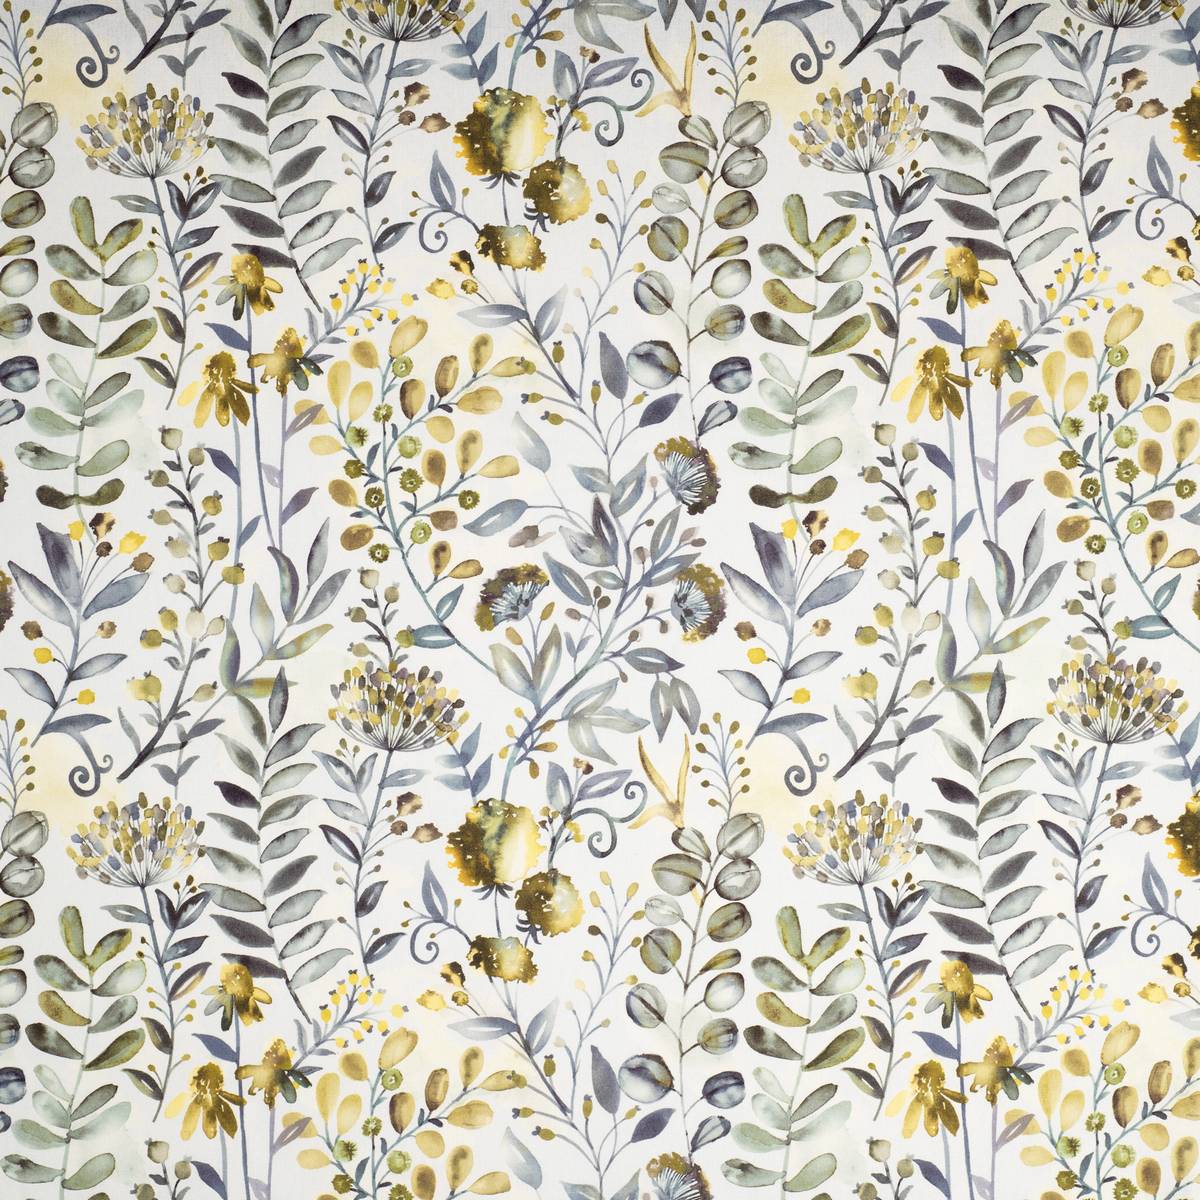 Whitwell Buttercup Fabric by Ashley Wilde